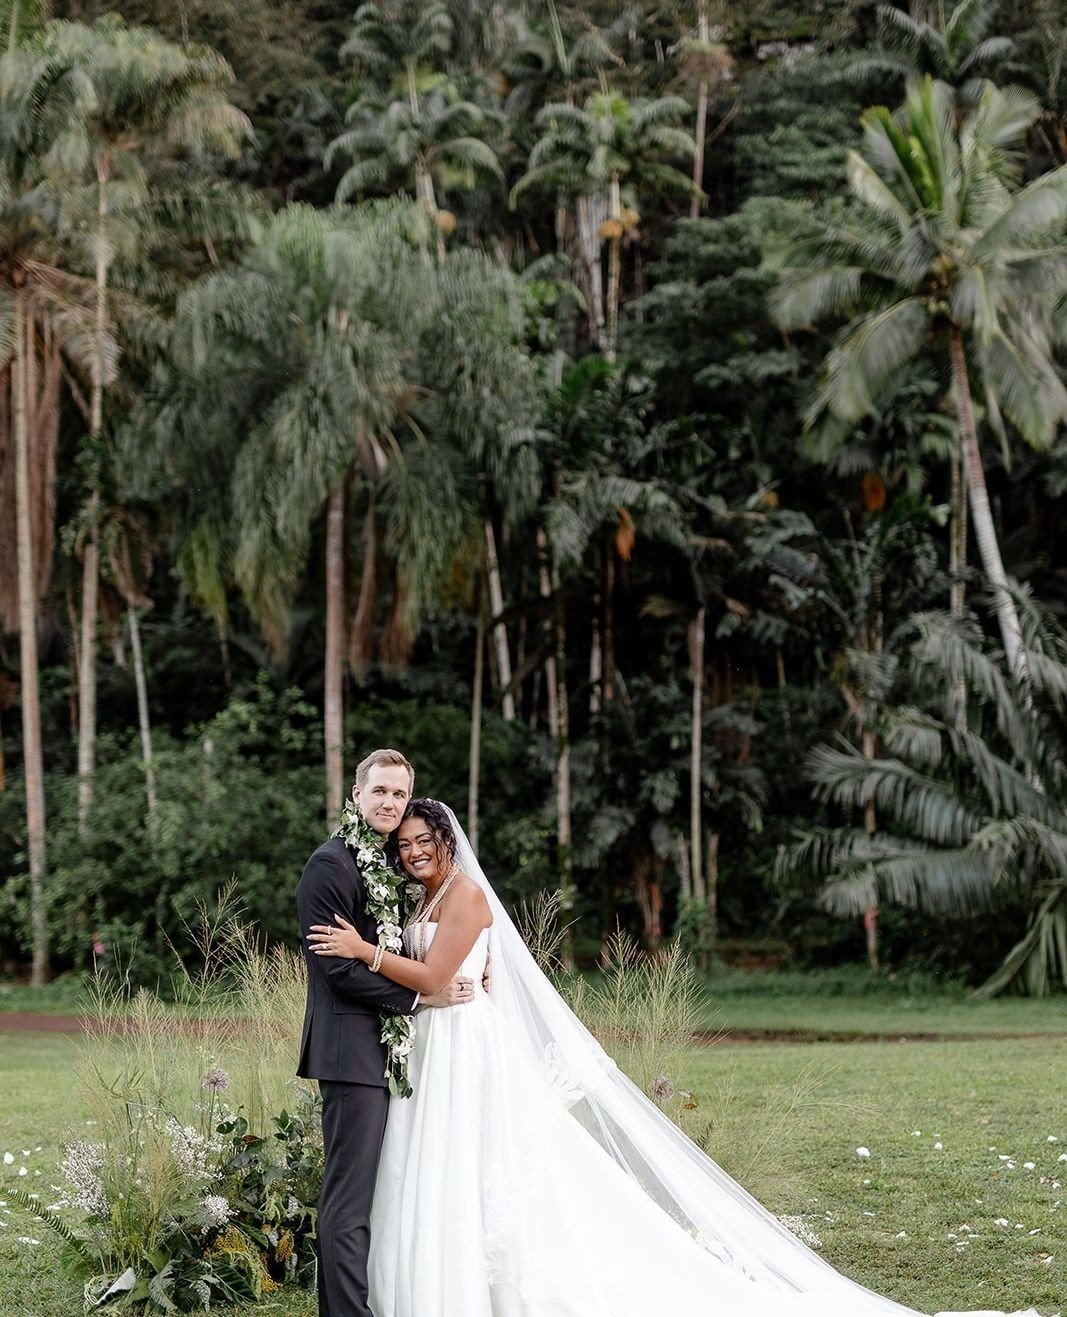 If you are a fan of a chic tropical aesthetic, you're not going to want to miss this week's gallery post!⁠
⁠
We absolutely loved every single element of this wedding design. From the beautiful ceremony backdrop, to the florals all the way down to the